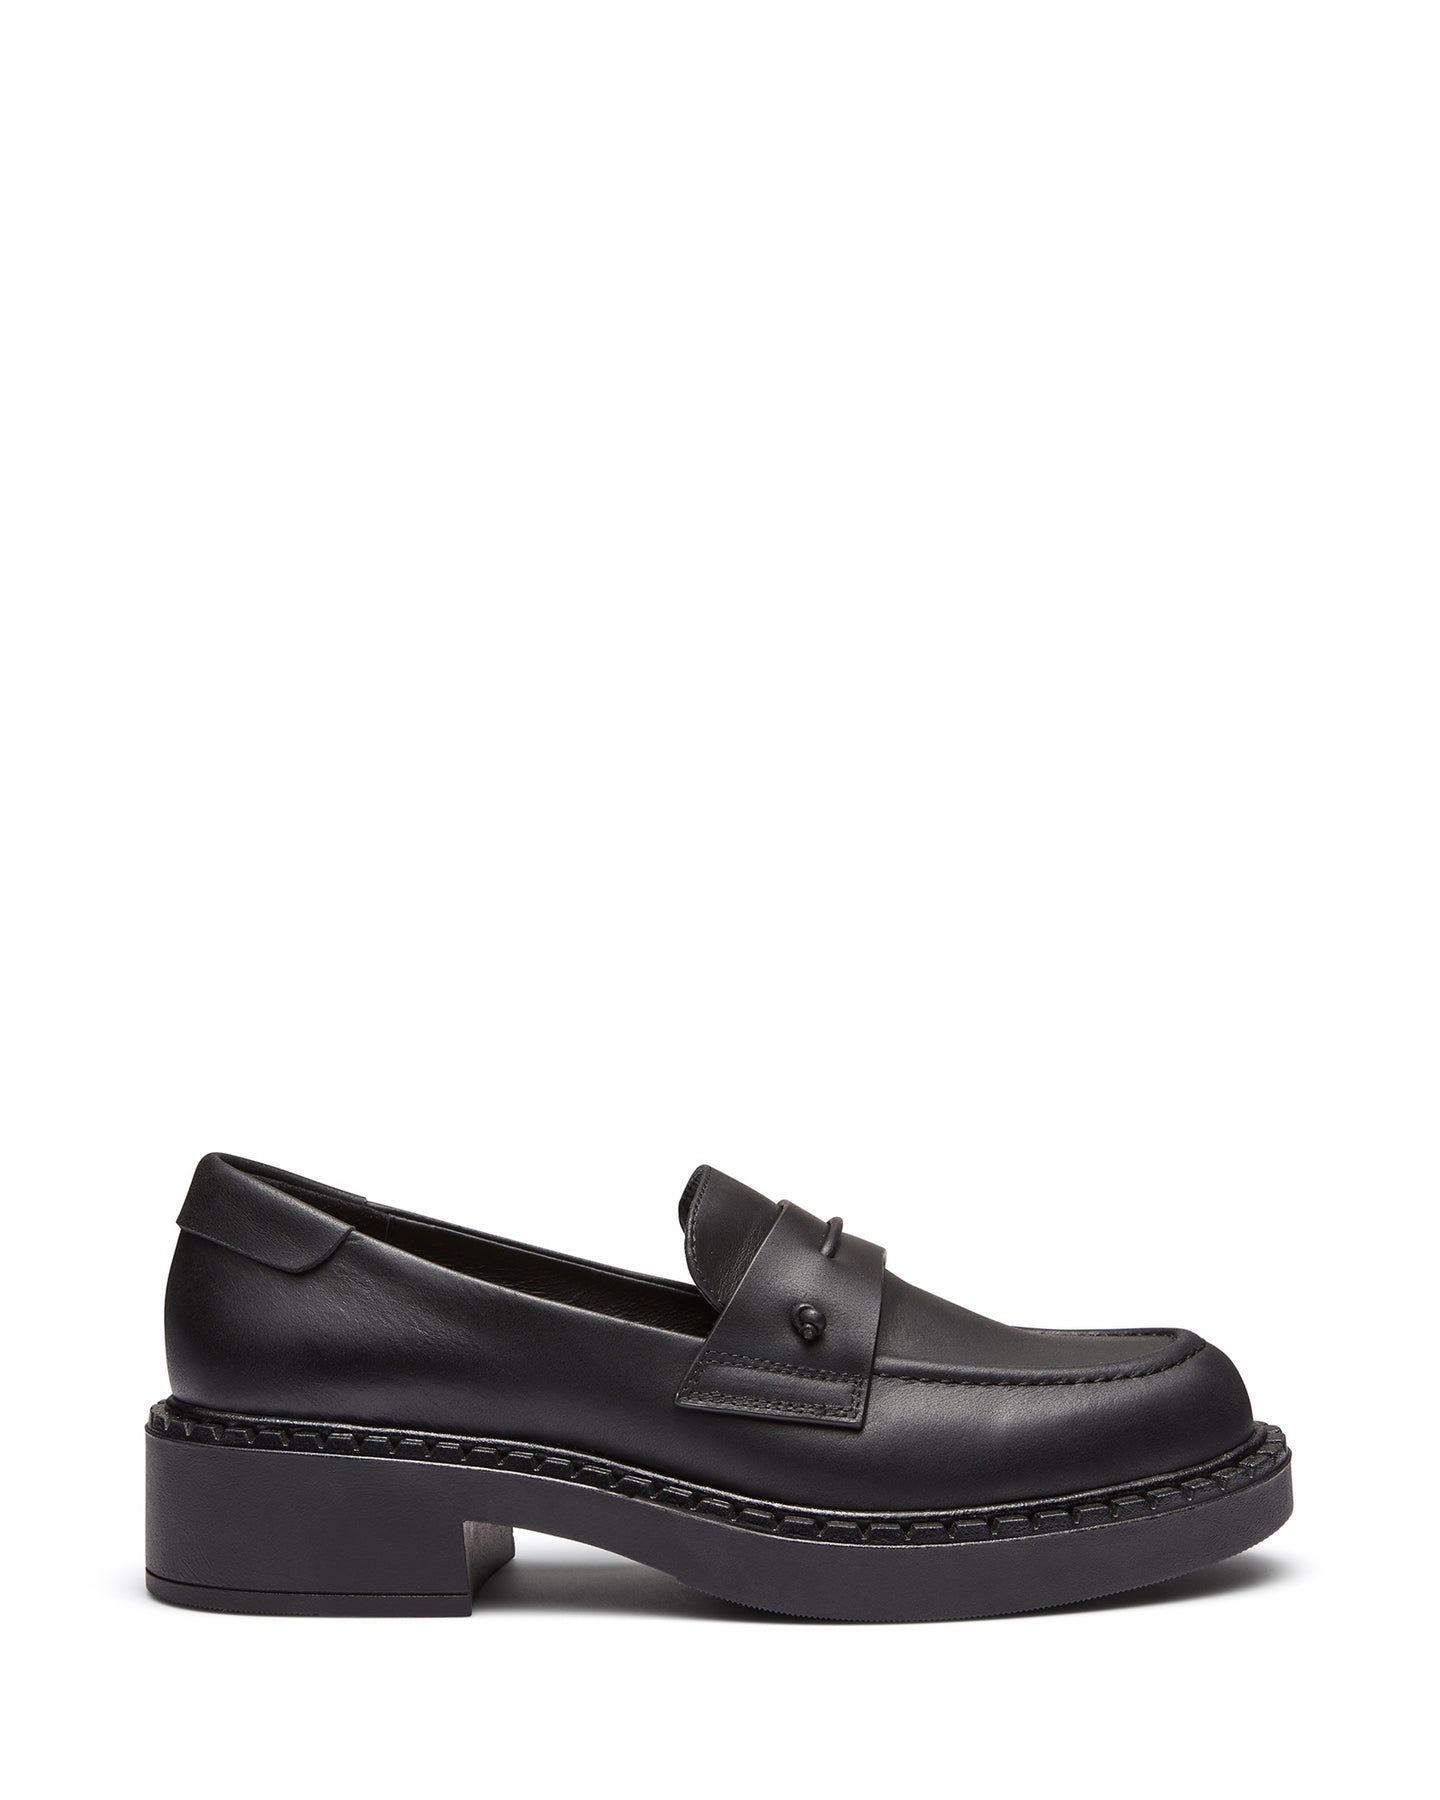 Just Because Shoes Axel Black | Women's Leather Loafers | Flats | Slip On